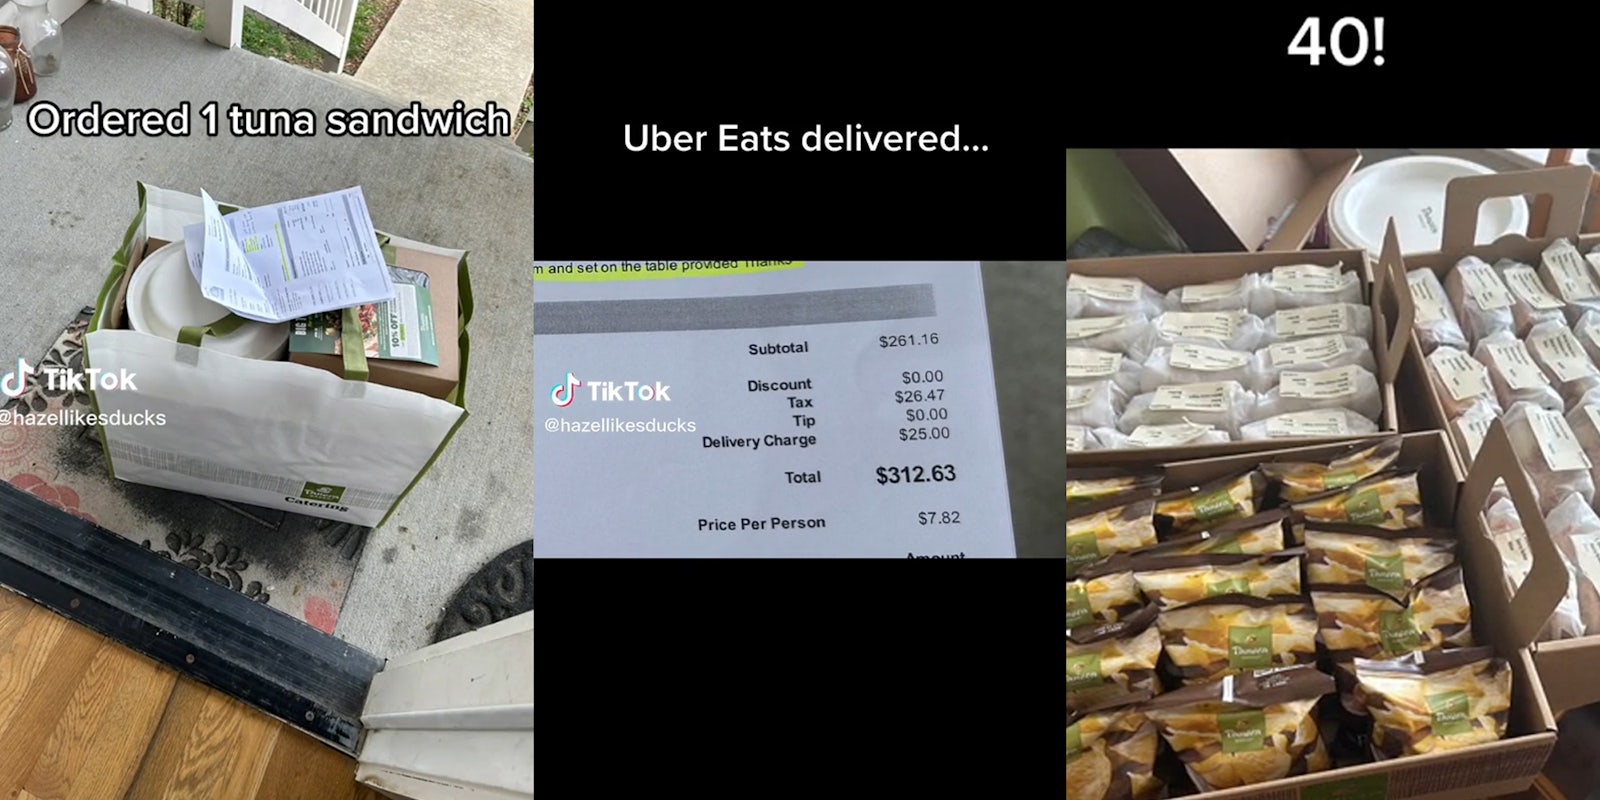 uber eats delivers 40 tuna sandwiches instead of 1